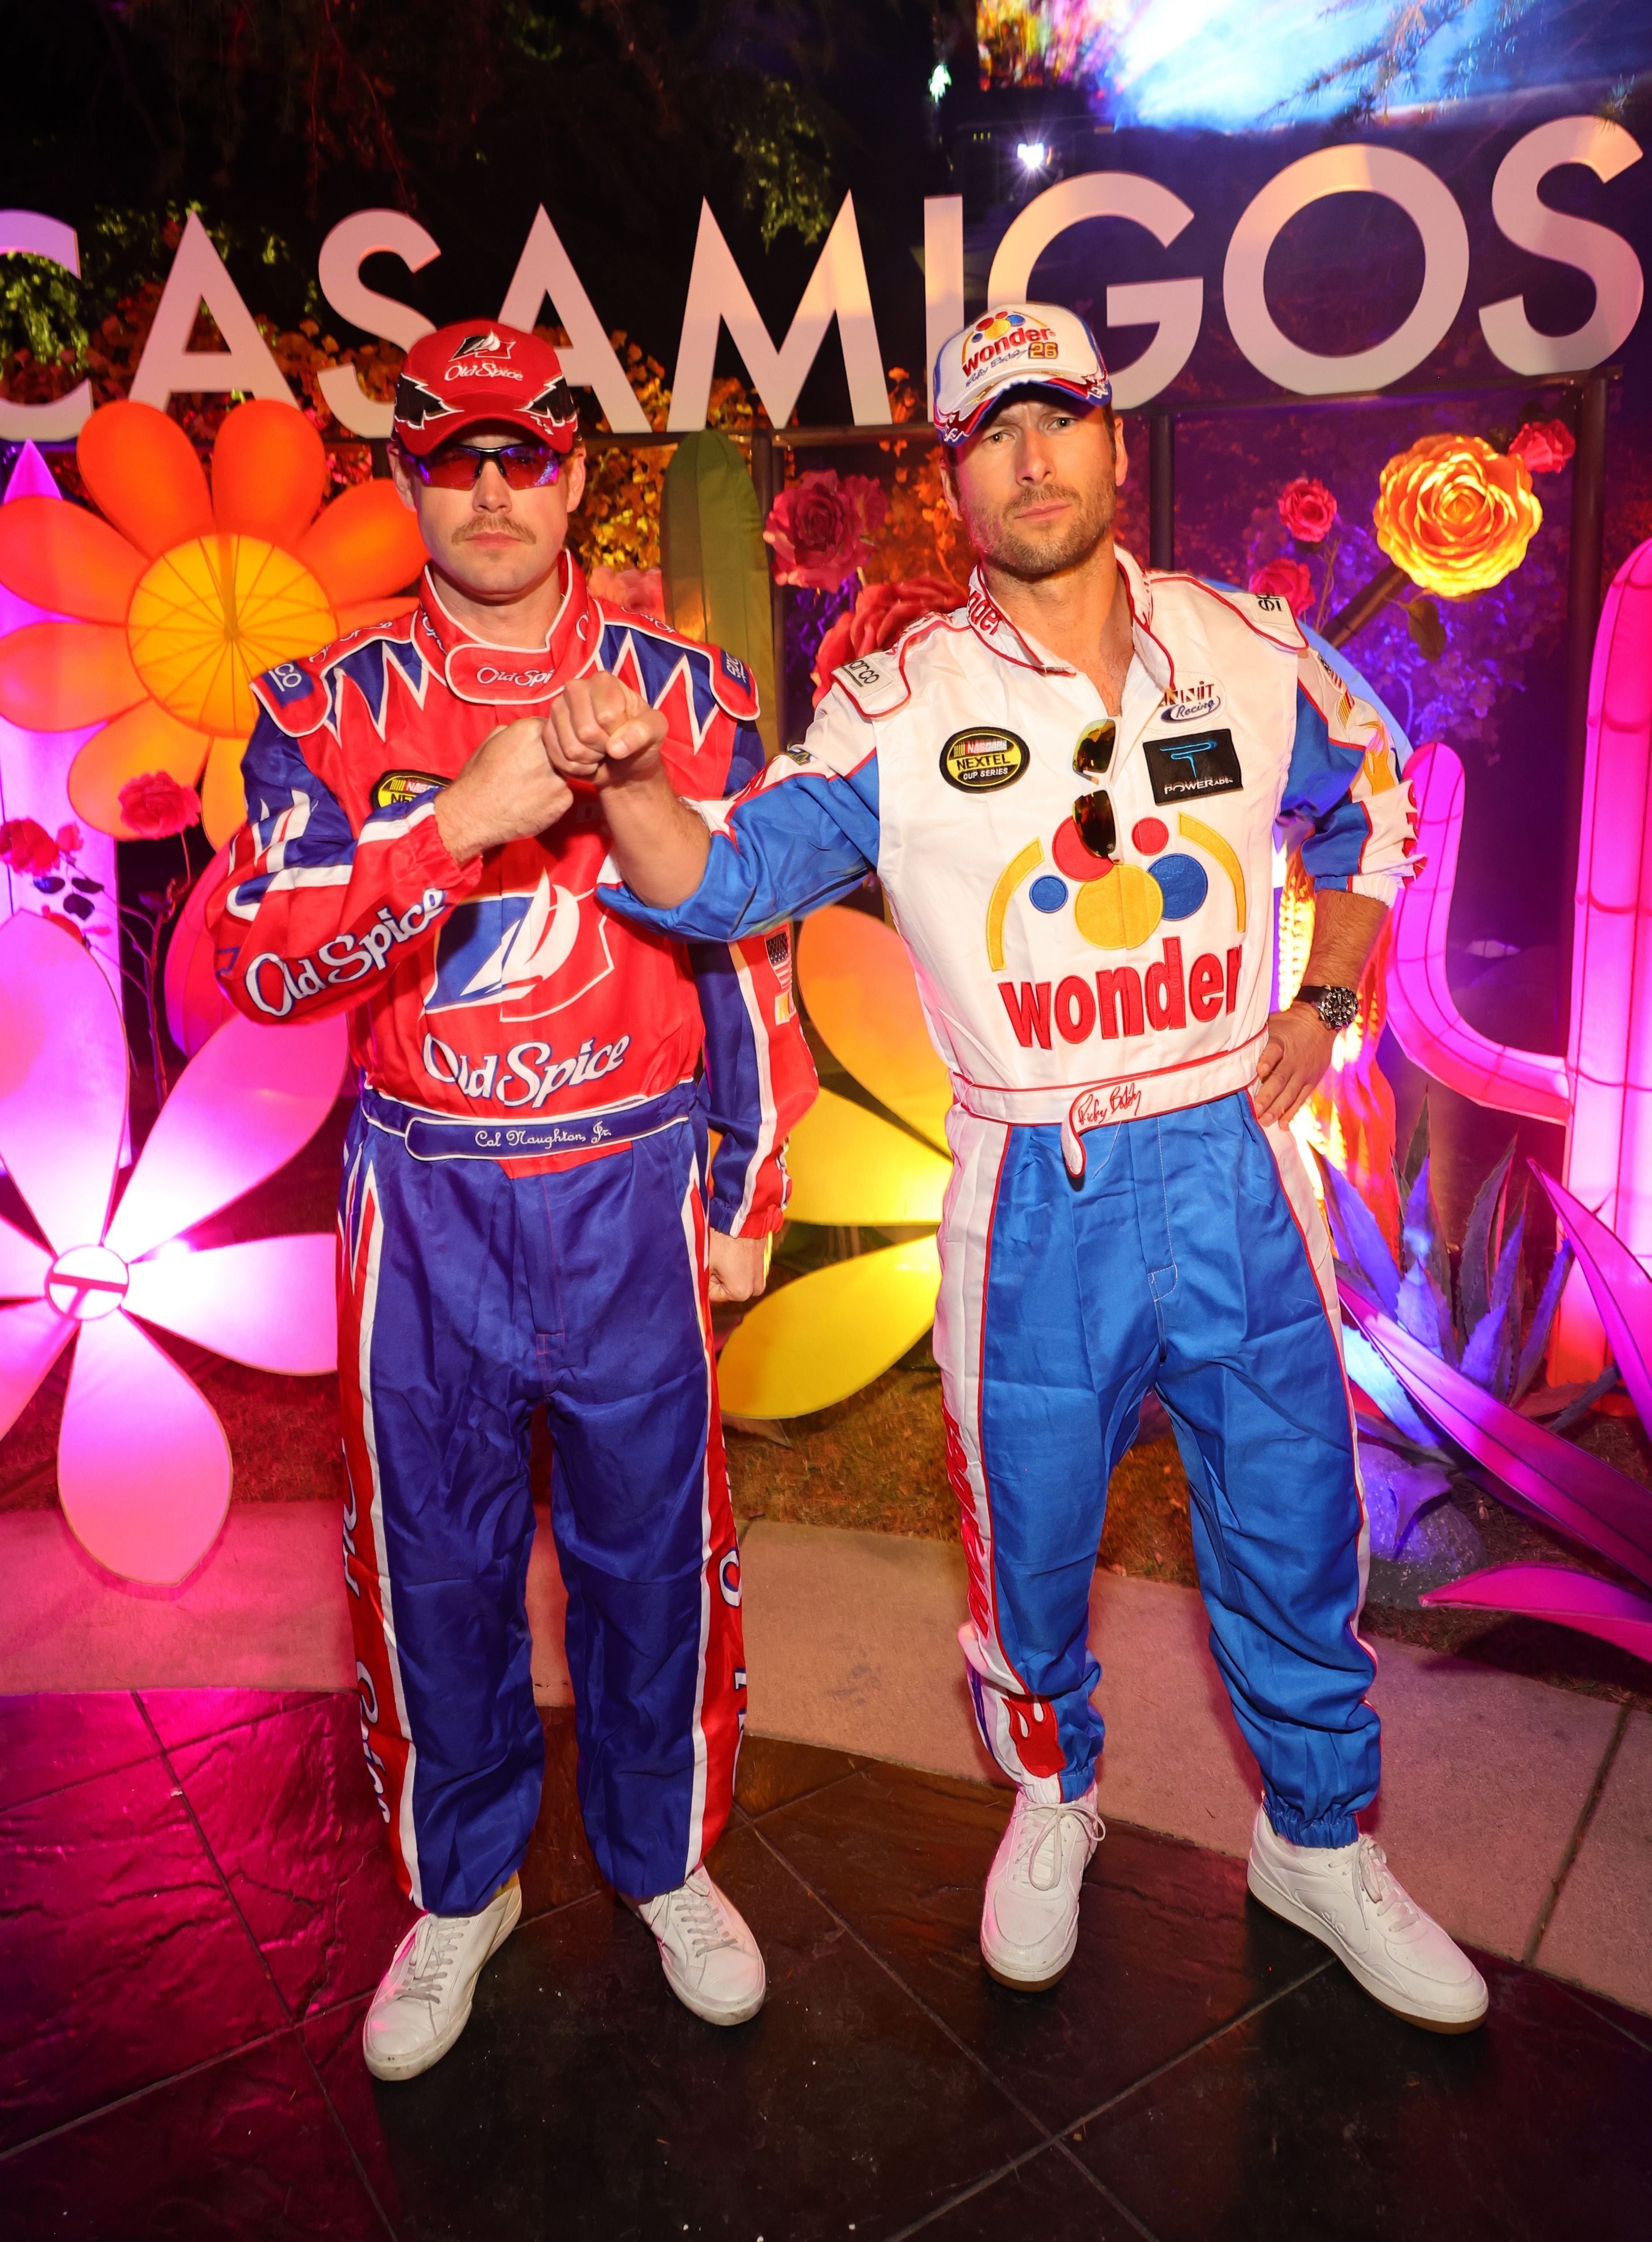 Chord and Glen in costume